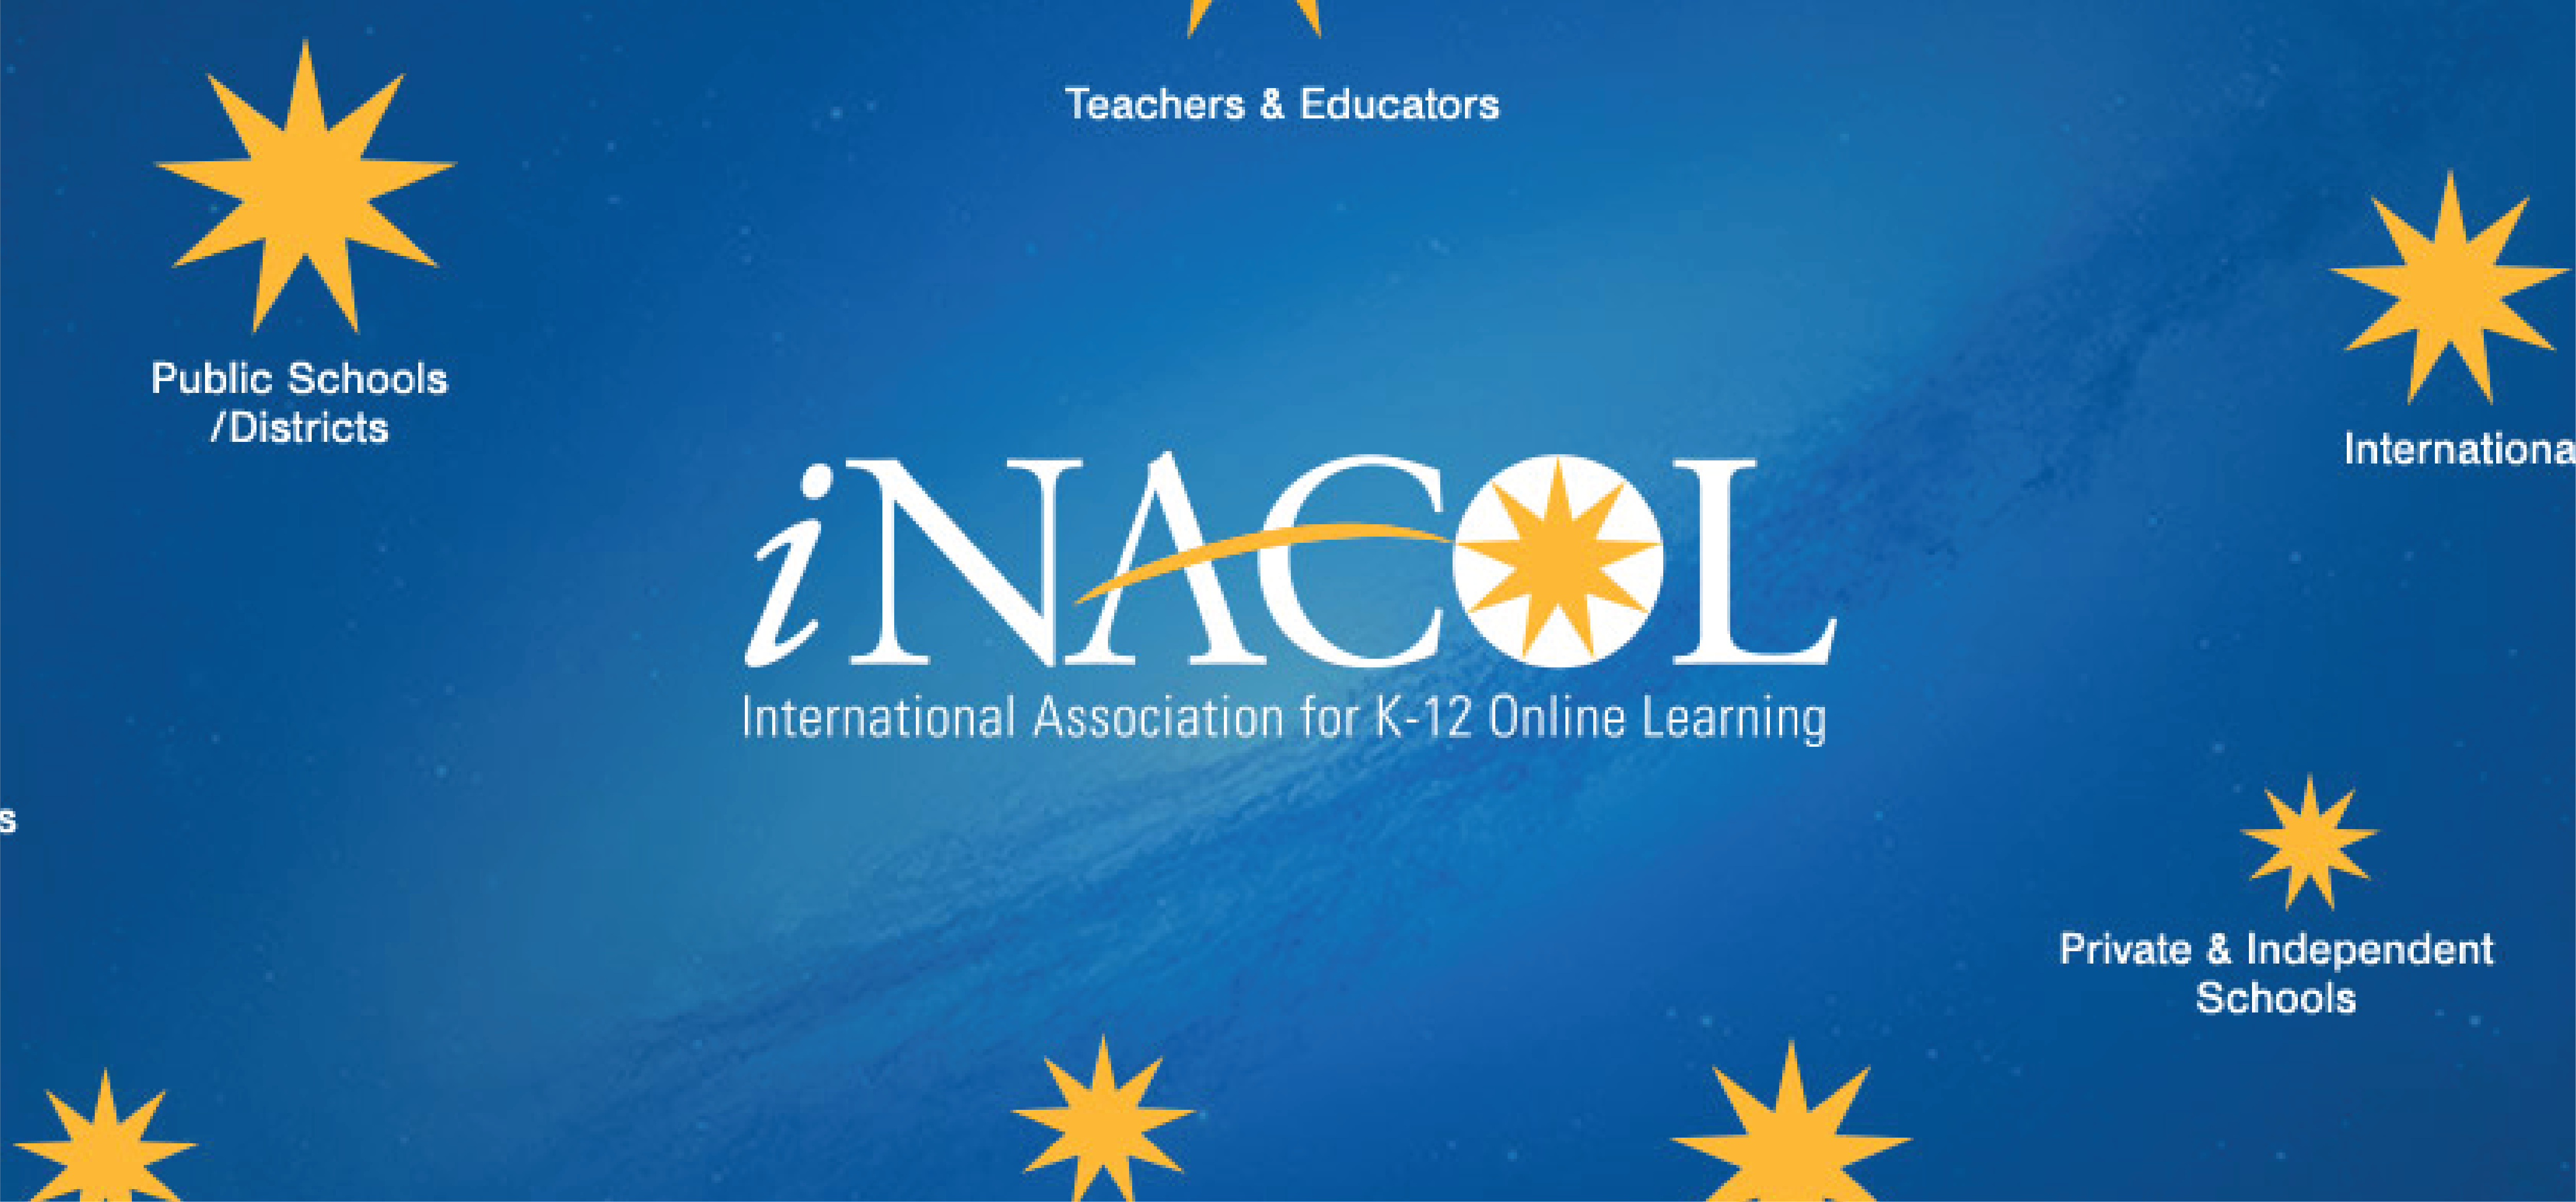 Inacol Blended Learning Award - and the Winner is